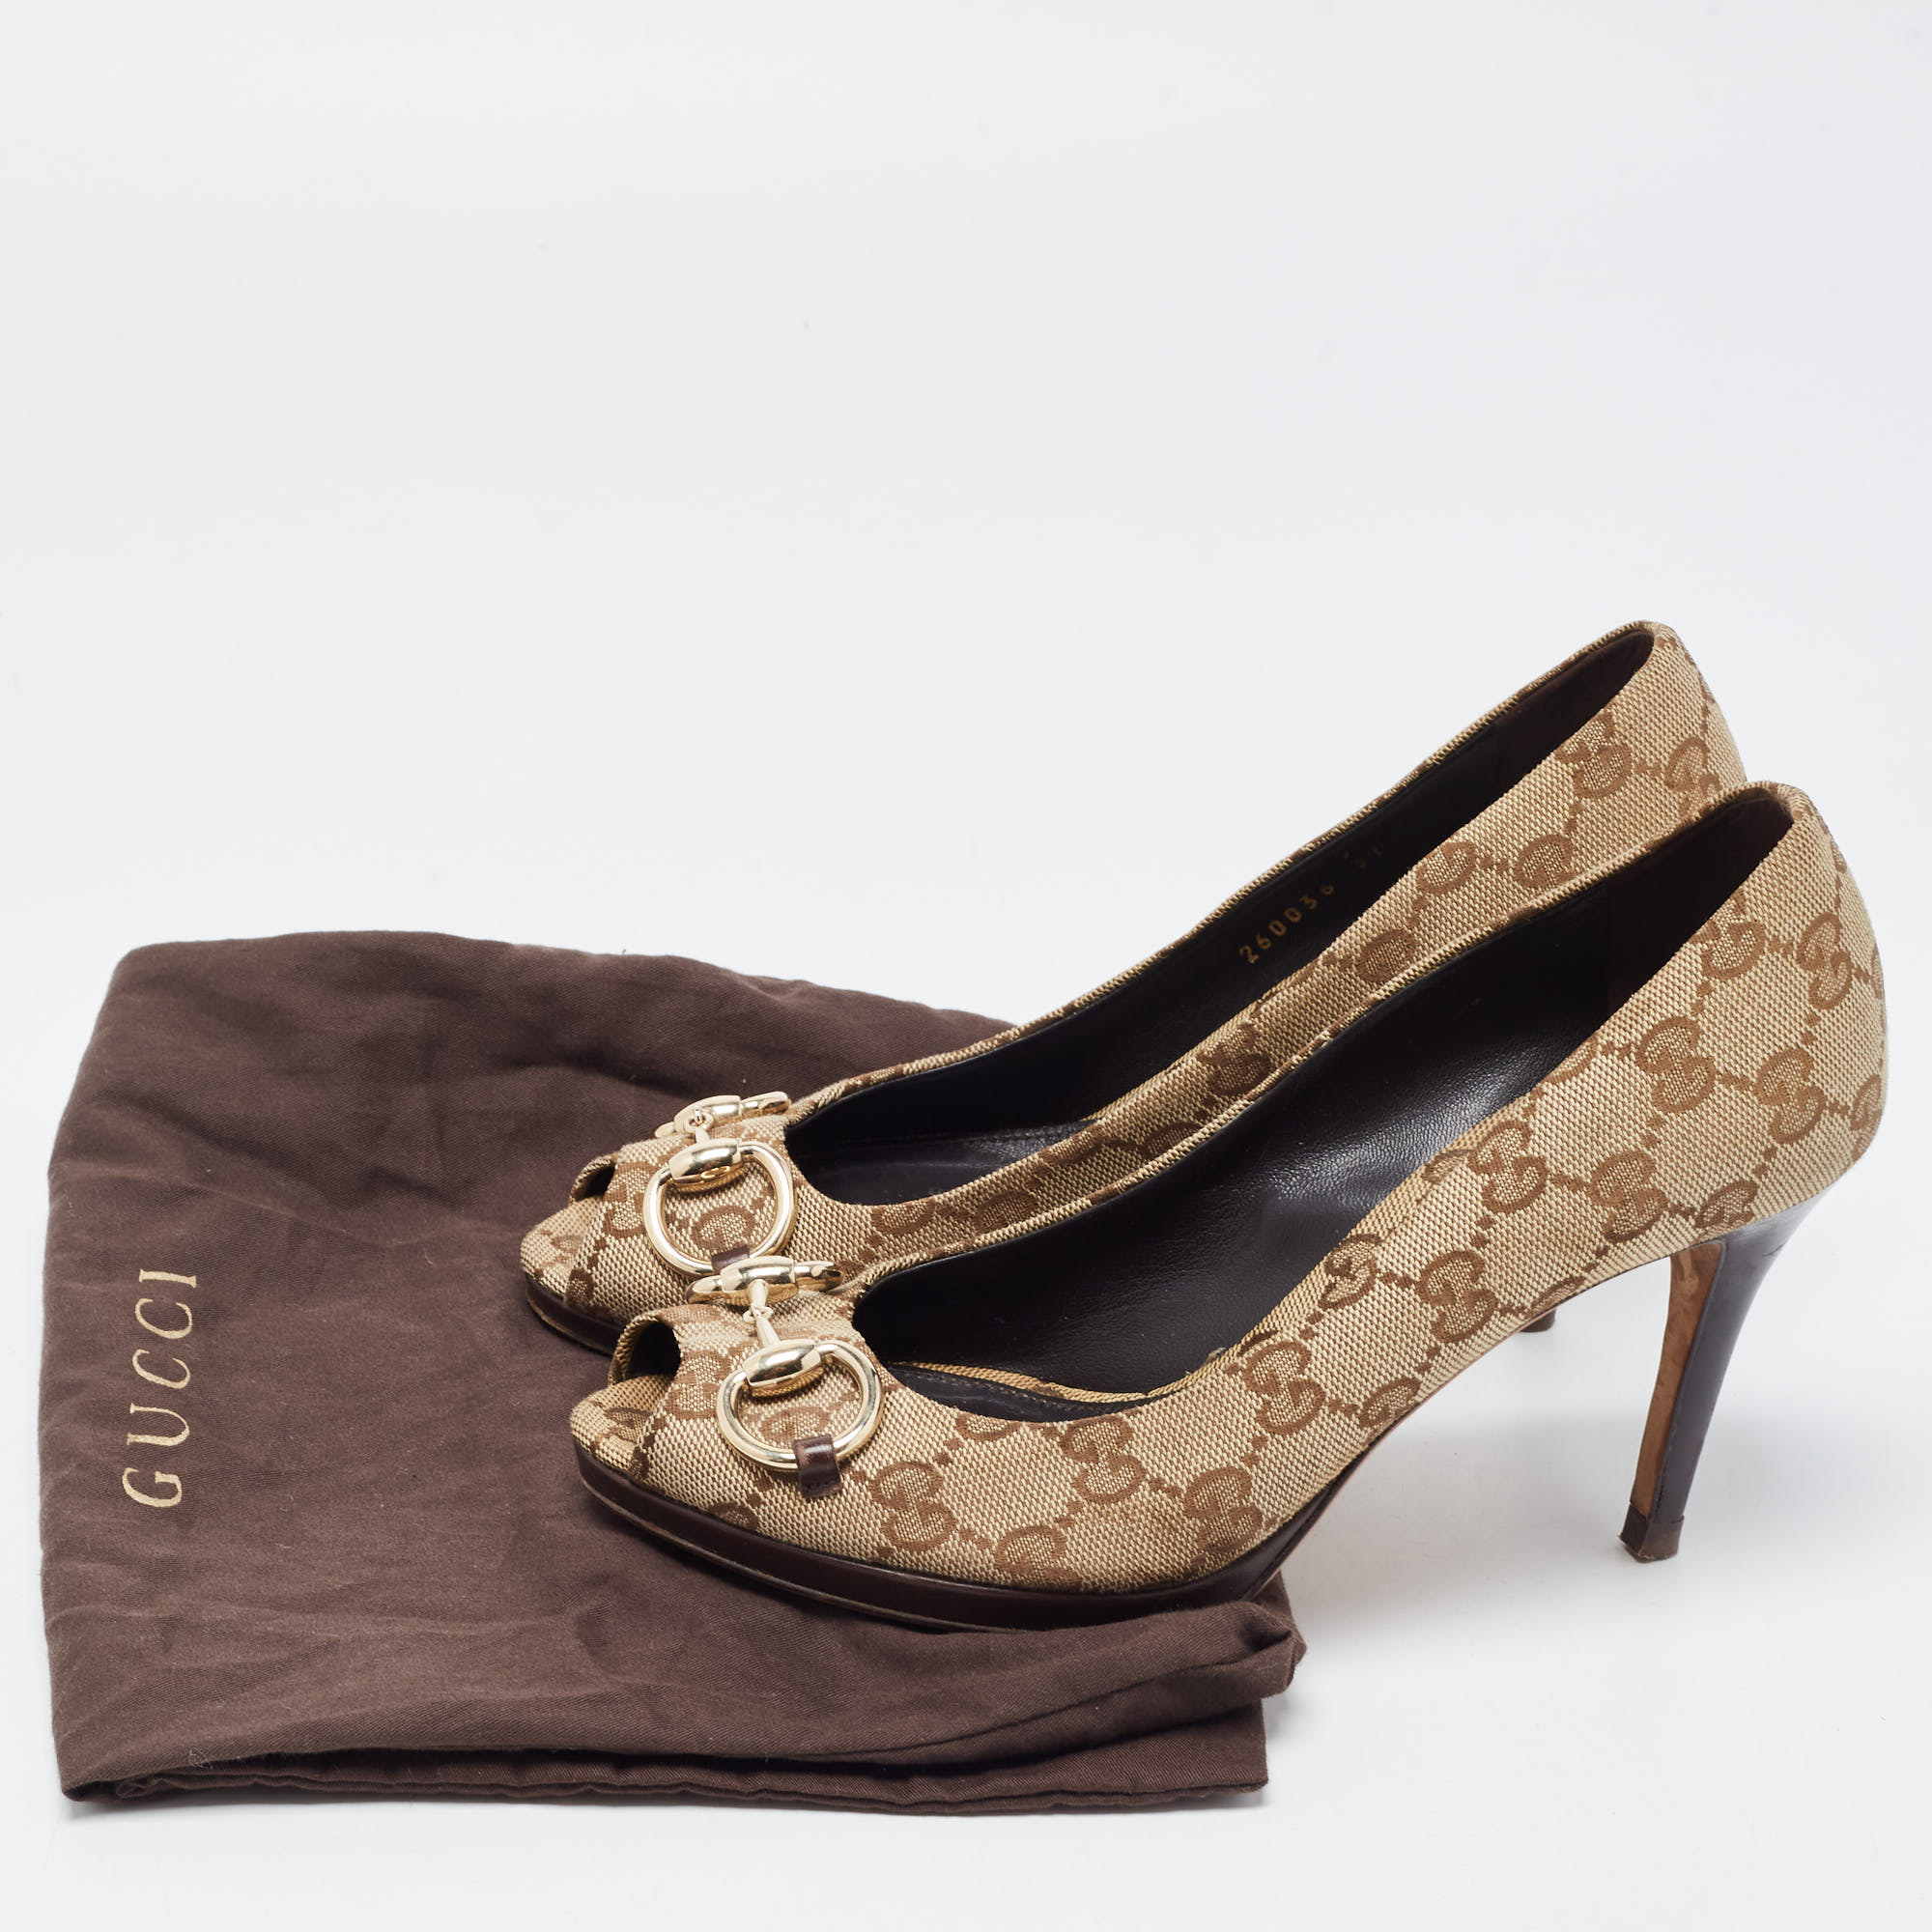 Gucci Beige Canvas Peep Toe Hollywood Pumps Size 37